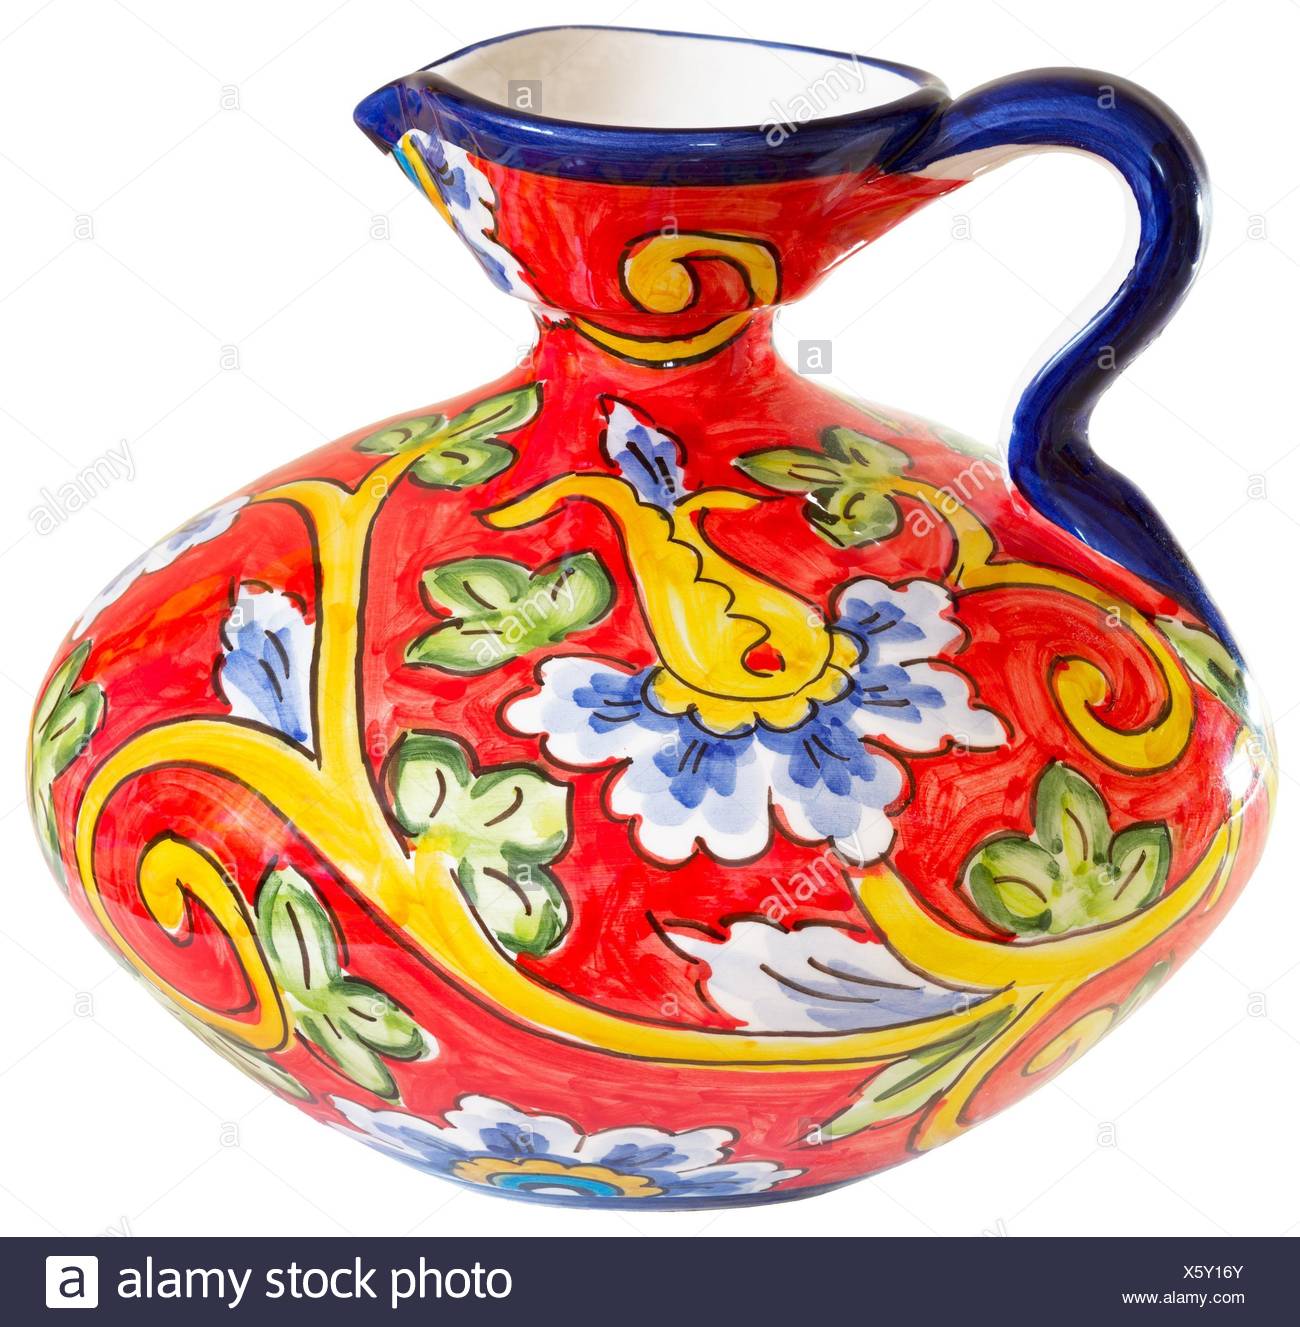 Download Beautiful Red And Yellow Ceramic Glazed Jar Stock Photo Alamy Yellowimages Mockups